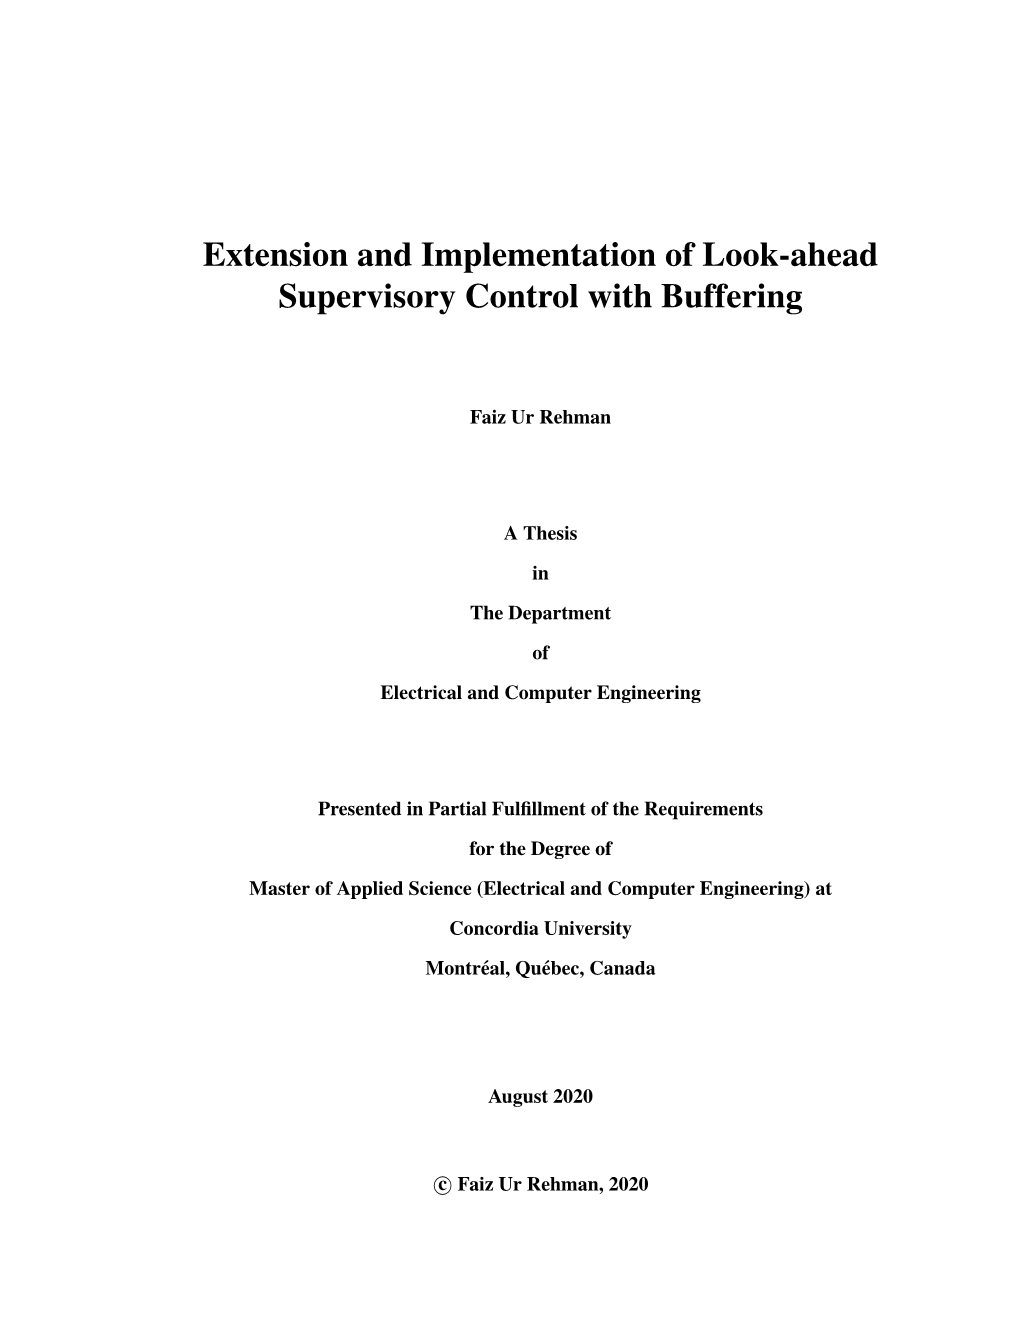 Extension and Implementation of Look-Ahead Supervisory Control with Buffering